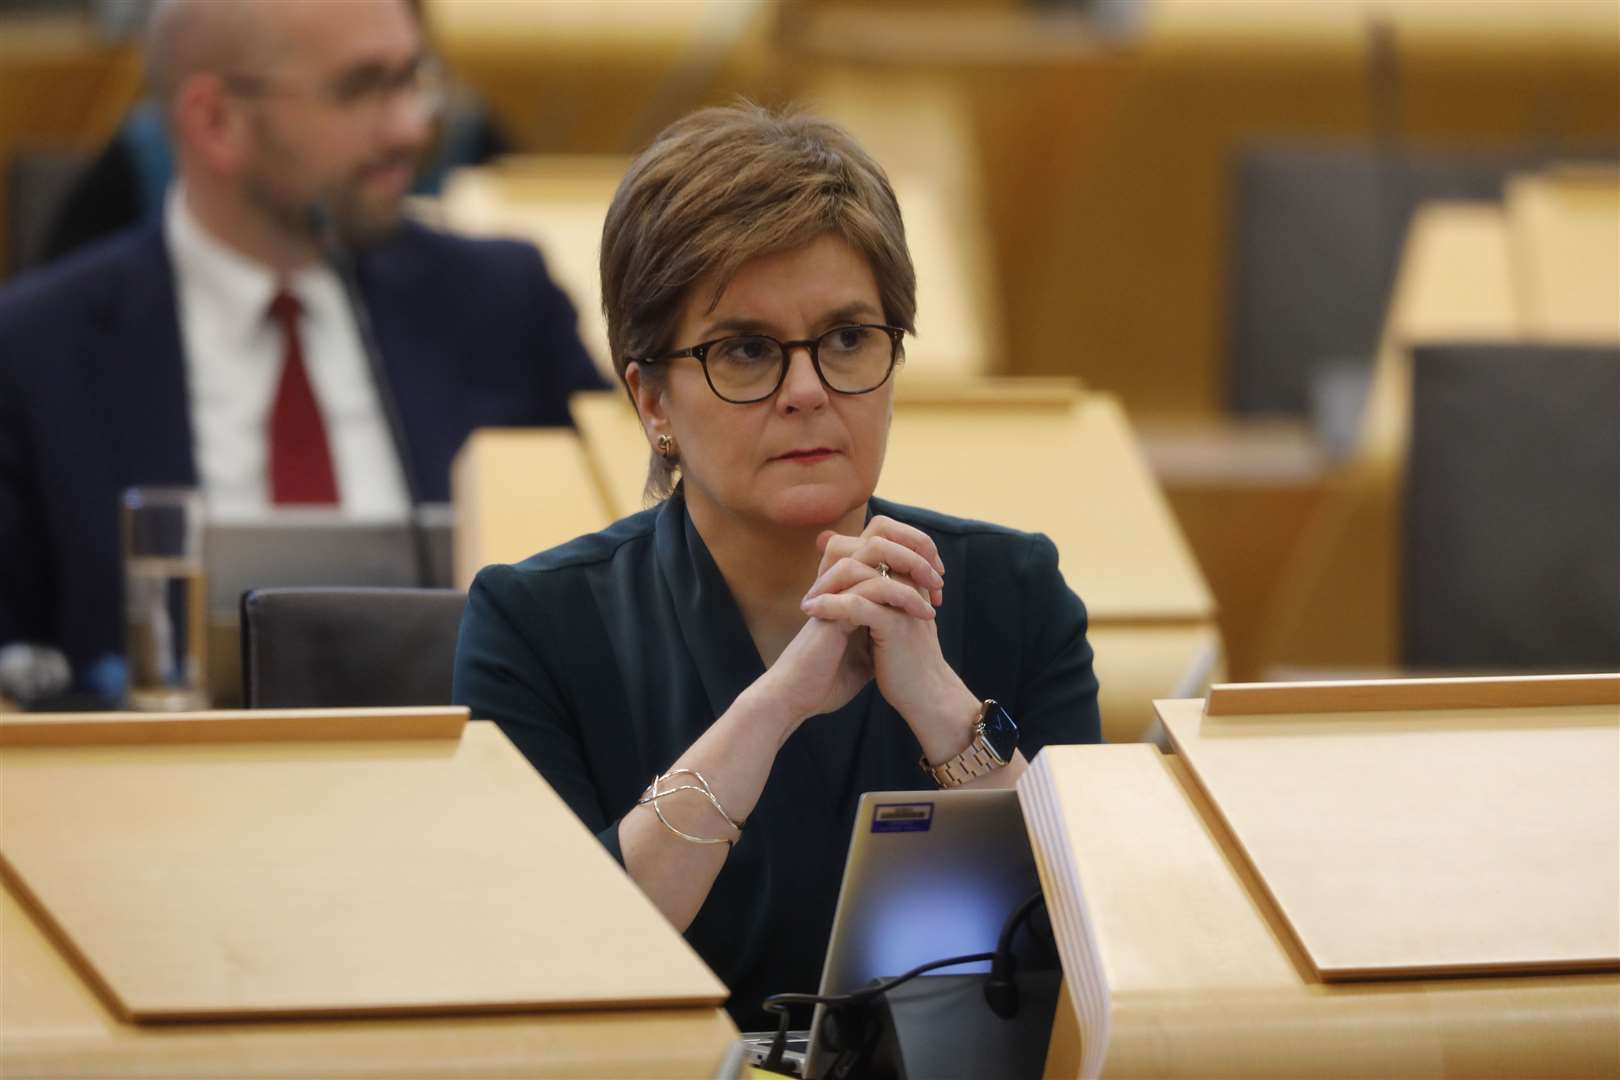 First Minister Nicola Sturgeon has been urged to speak out against the Rosebank development (Andrew Cowan/Scottish Parliament/PA)